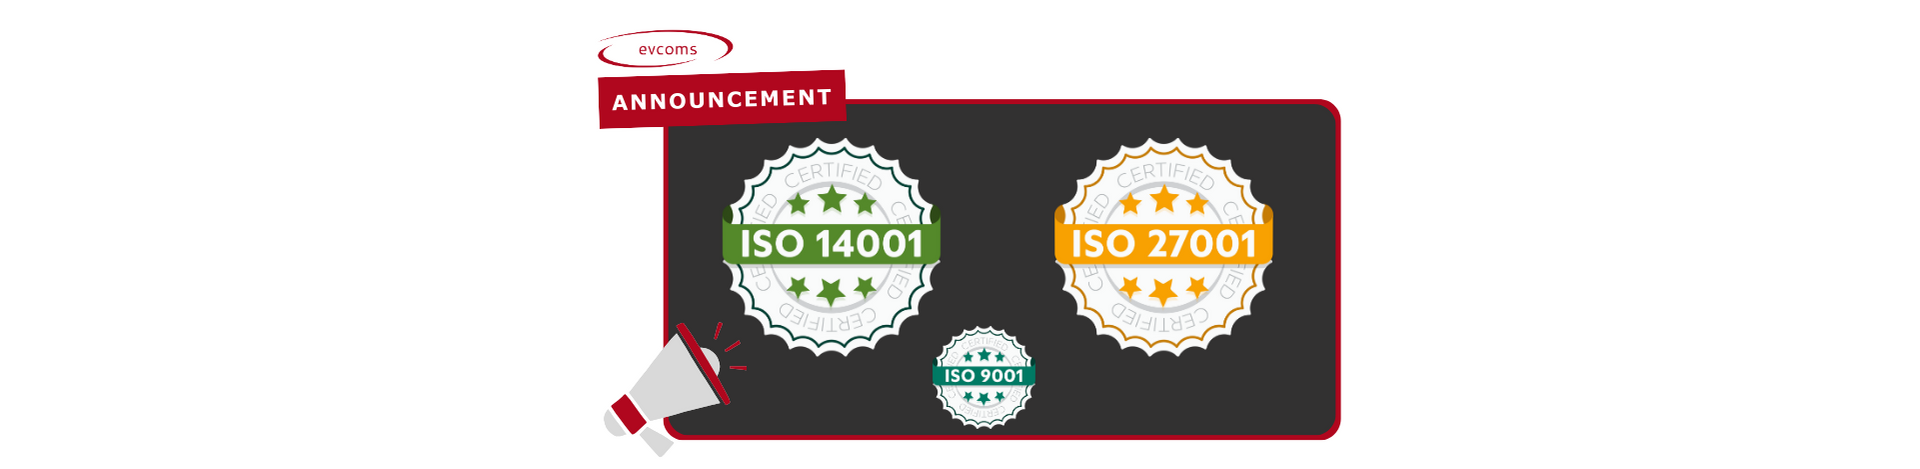 evcoms achieves ISO 27001 & 14001 certification. 